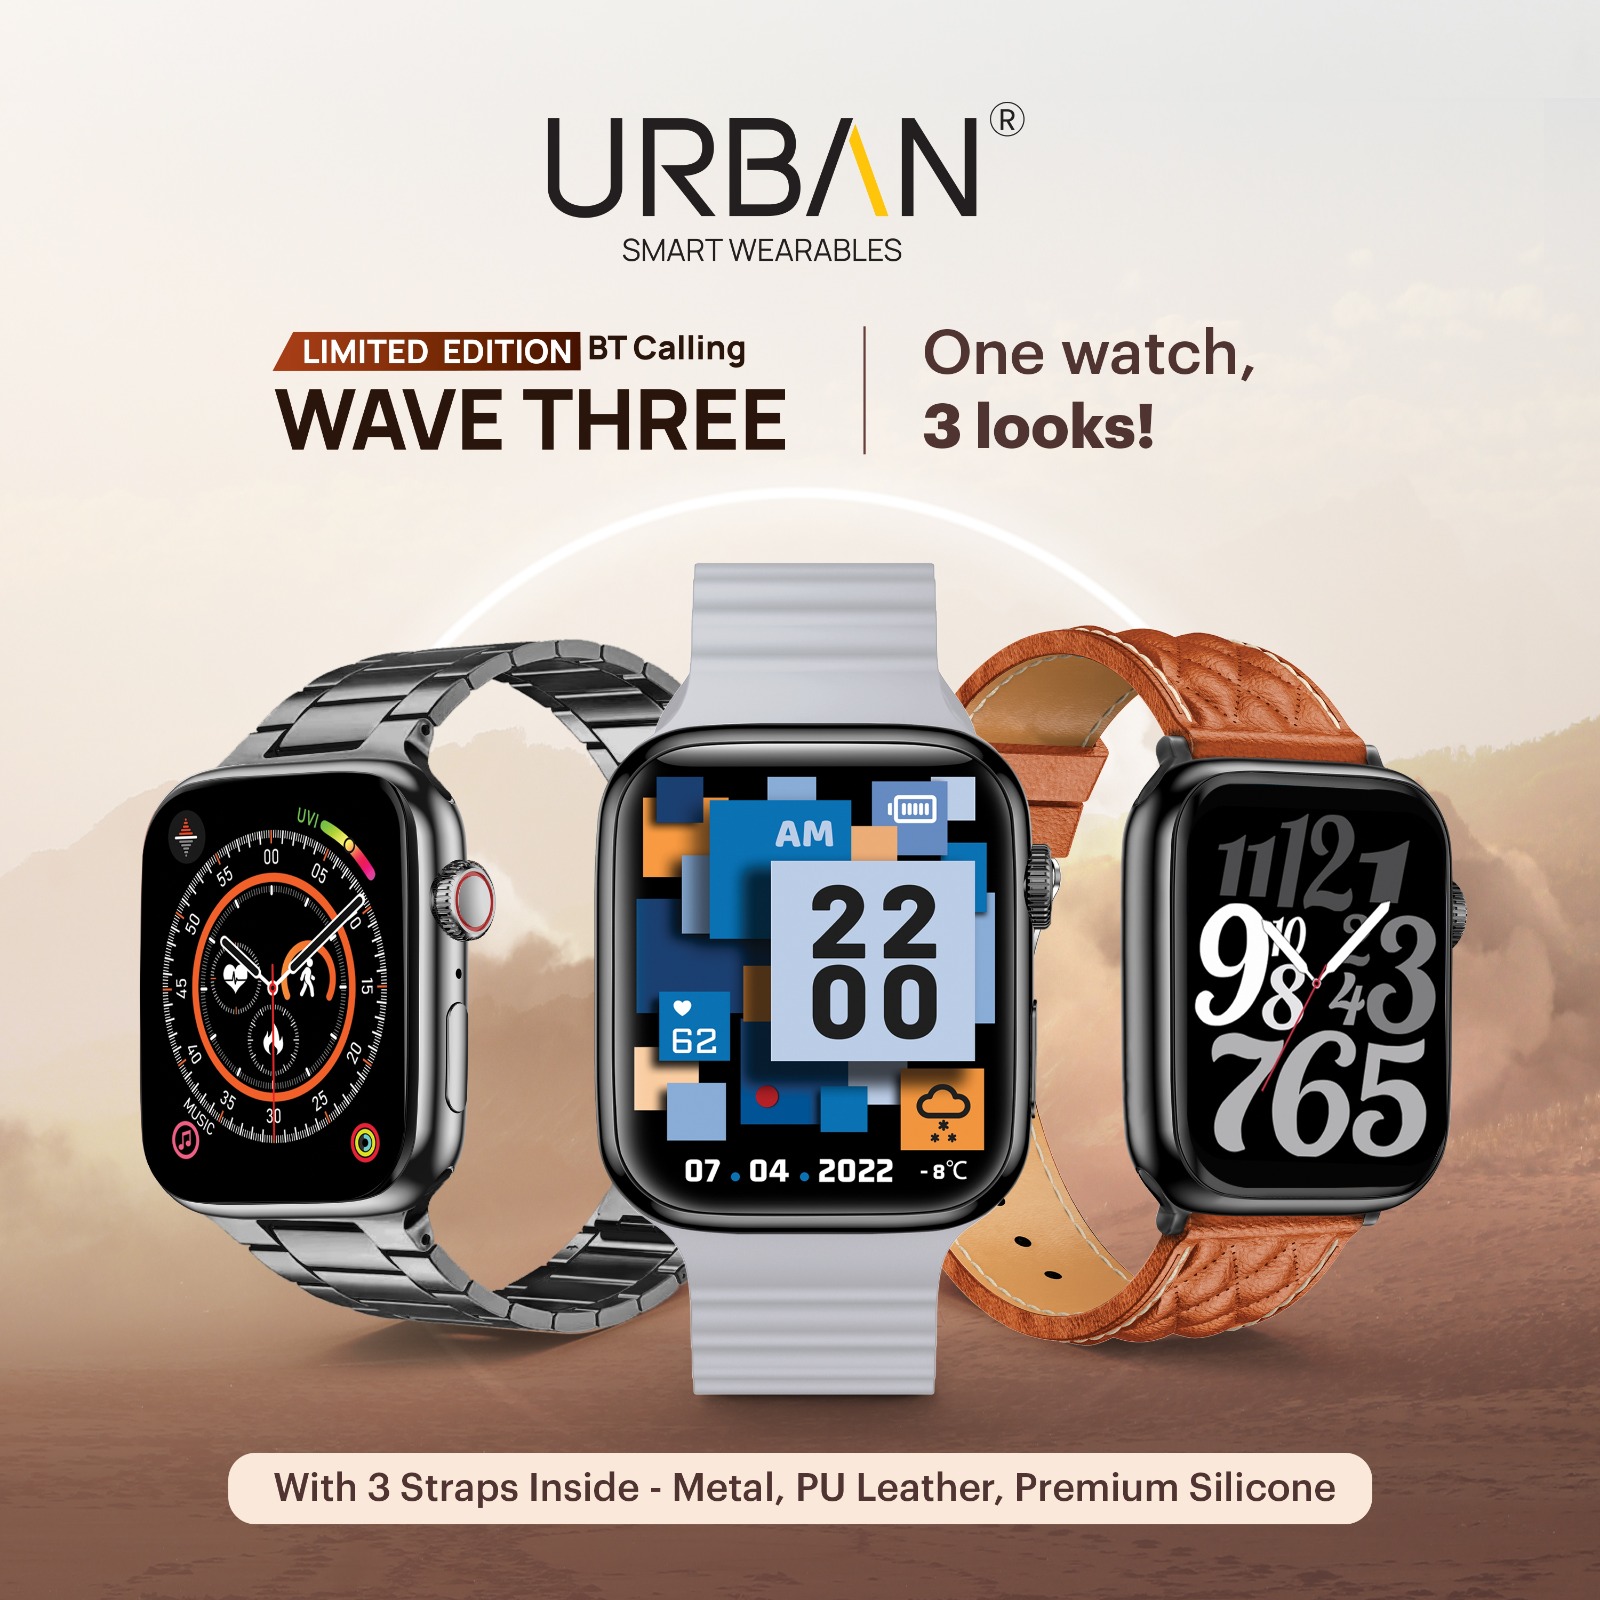 URBAN Wave Three: Specifications